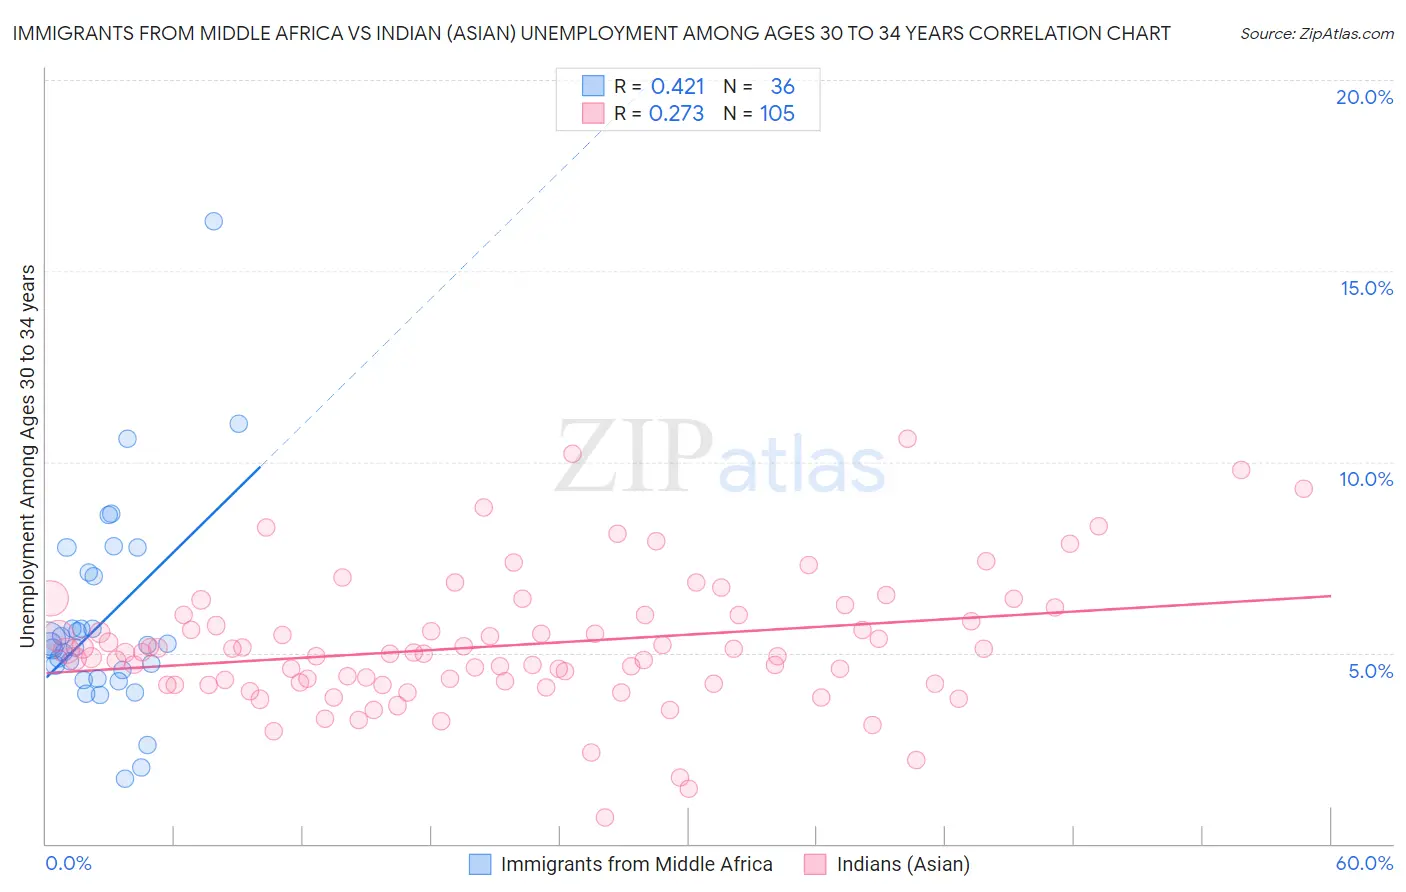 Immigrants from Middle Africa vs Indian (Asian) Unemployment Among Ages 30 to 34 years